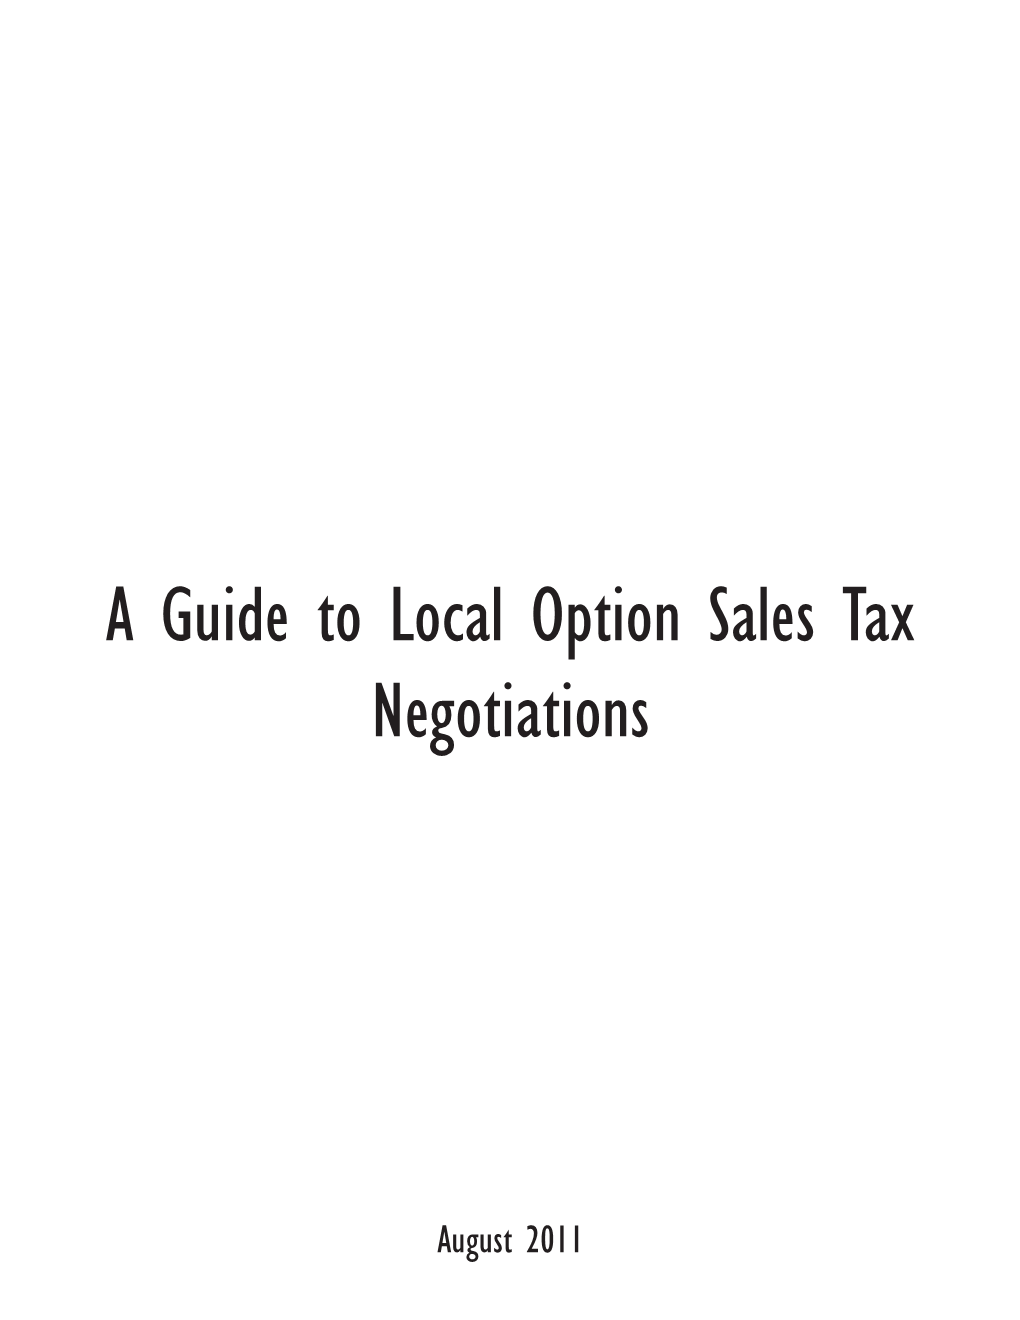 A Guide to Local Option Sales Tax Negotiations